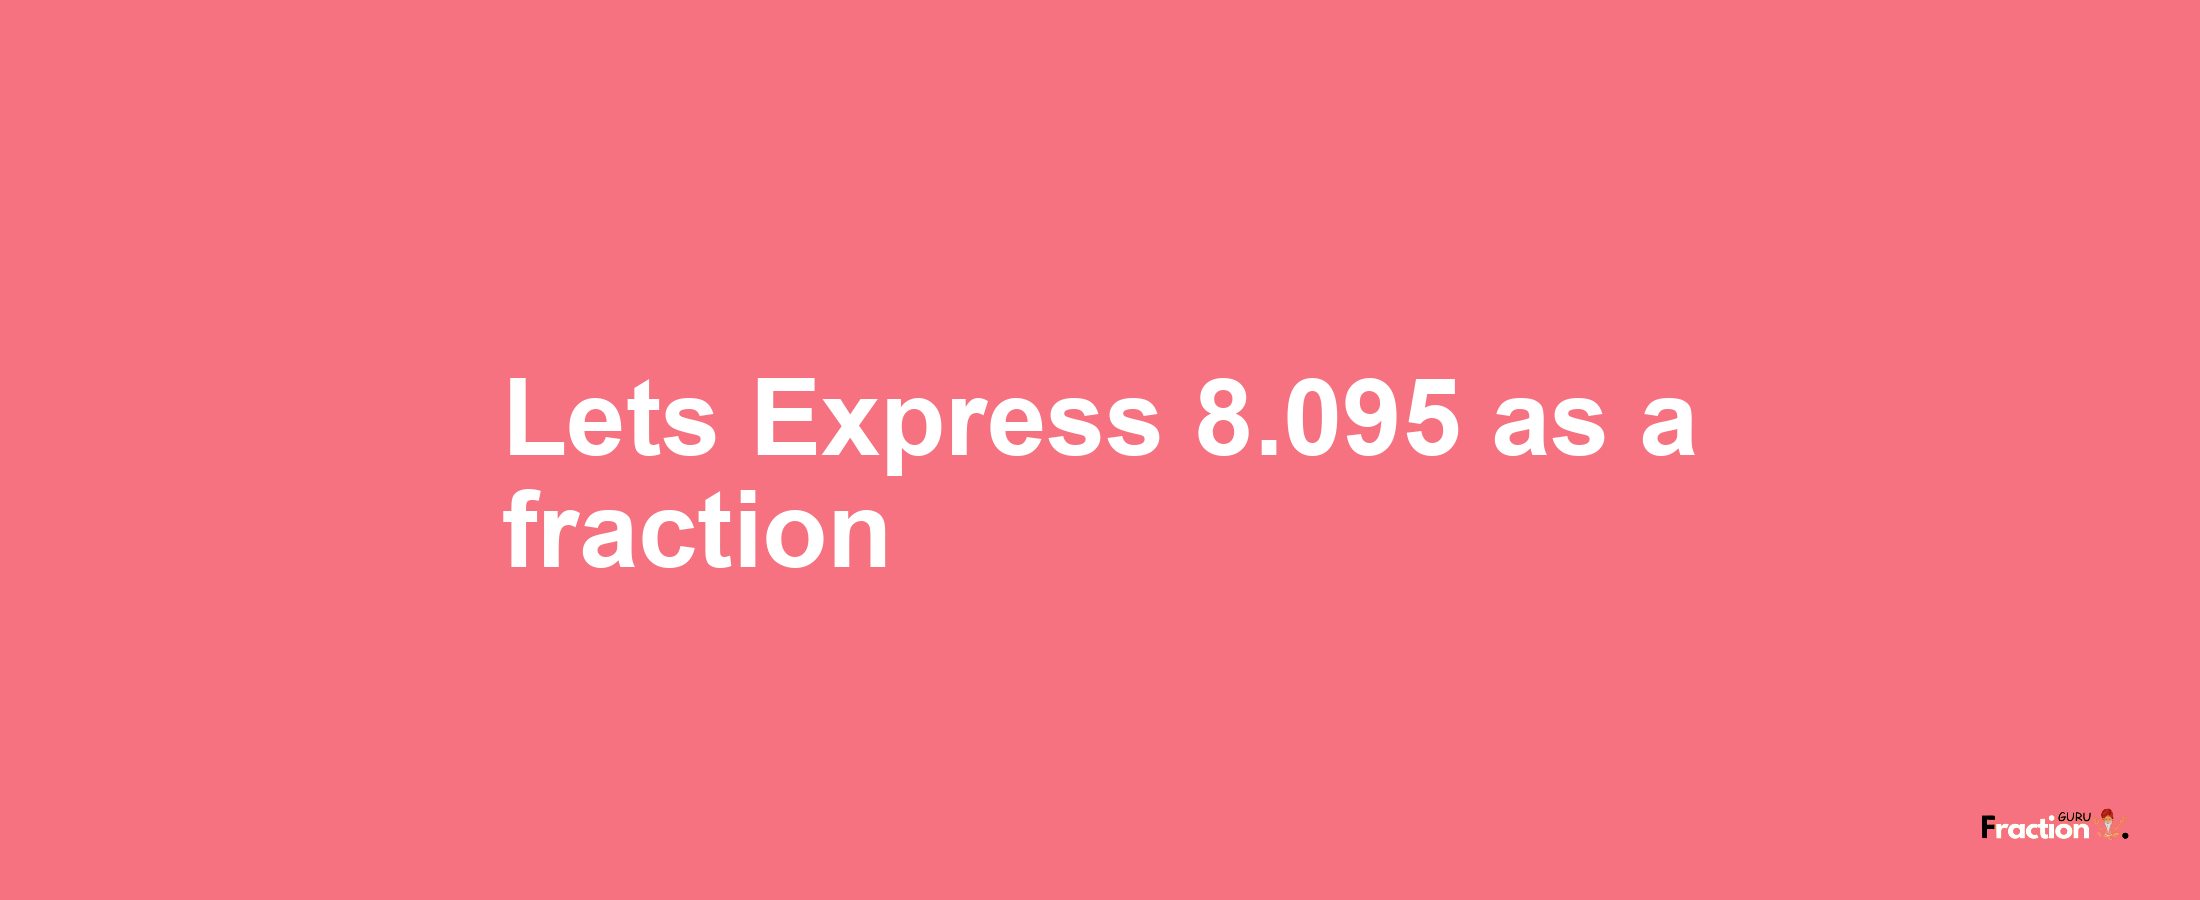 Lets Express 8.095 as afraction